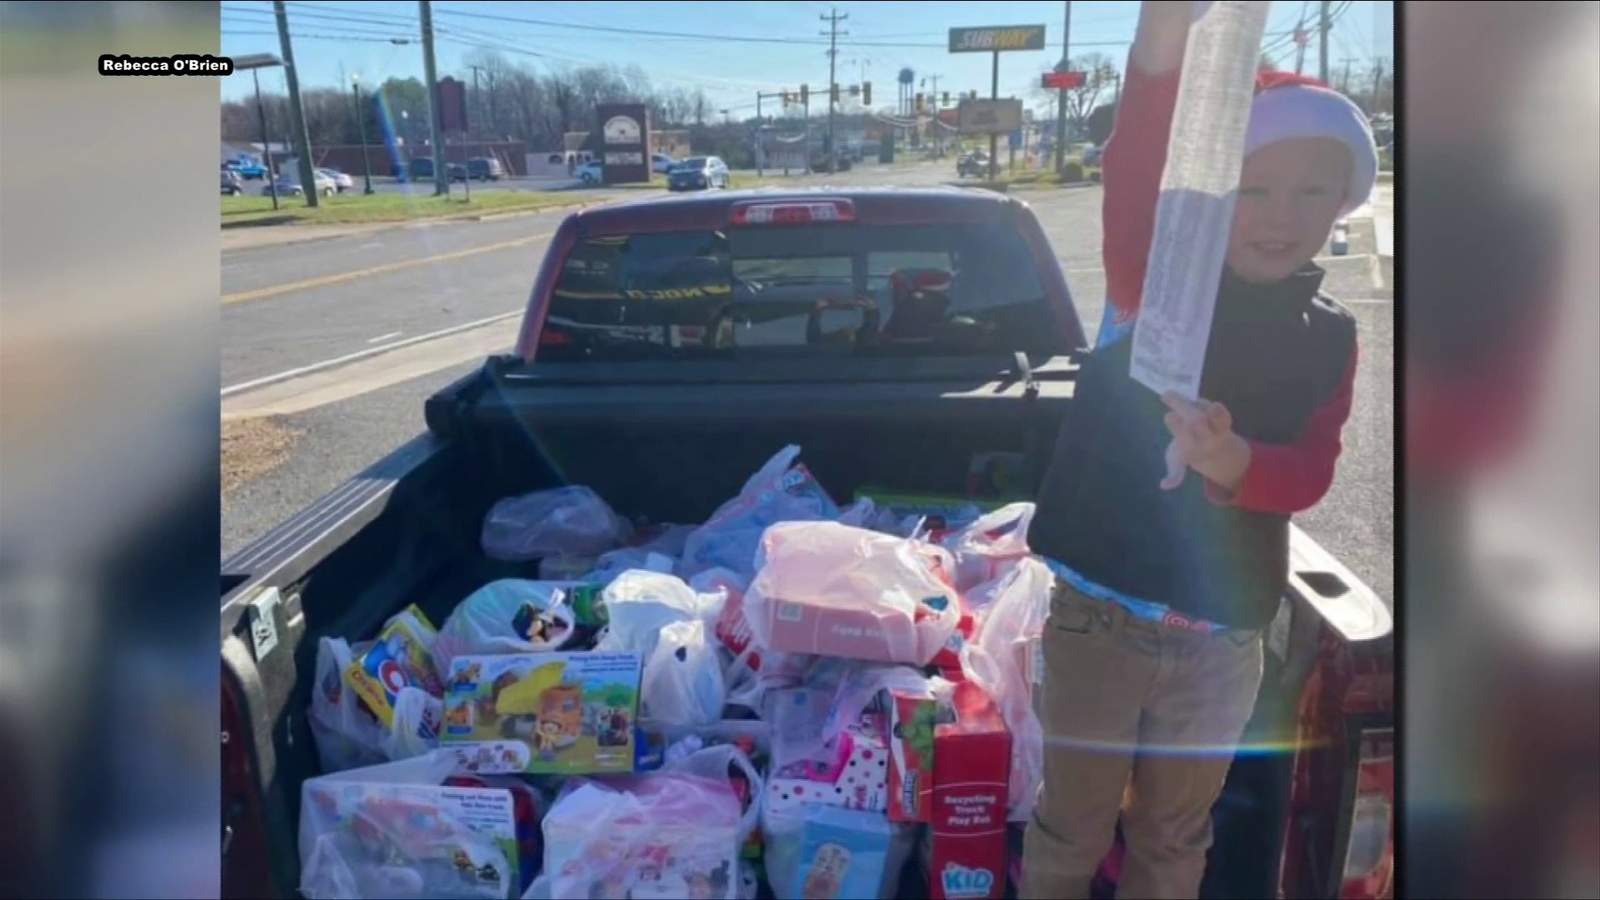 5-year-old Appomatox boy raises hundreds to donate toys to underprivileged kids